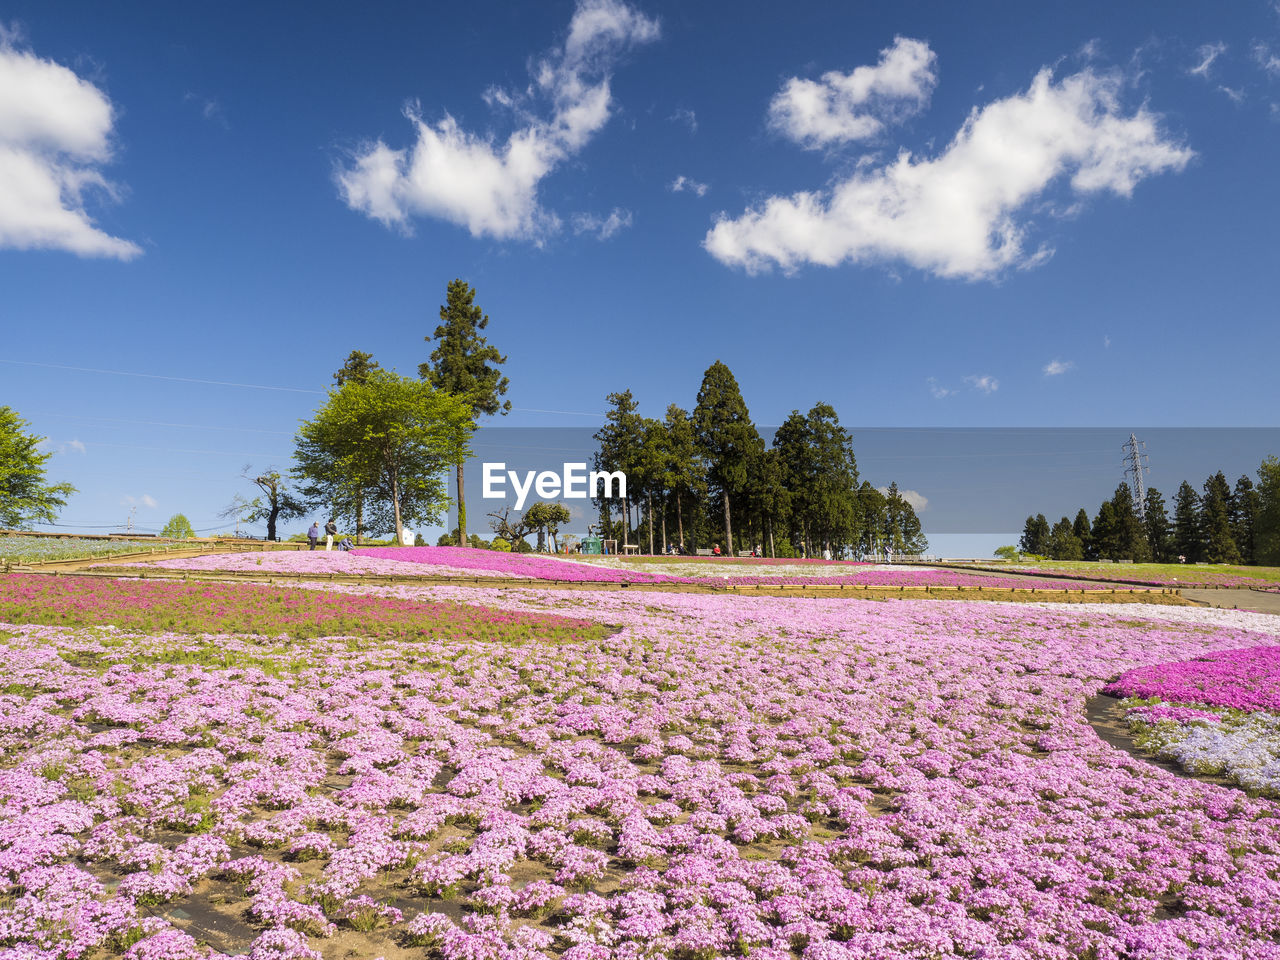 SCENIC VIEW OF PINK FLOWERING PLANTS ON LAND AGAINST SKY